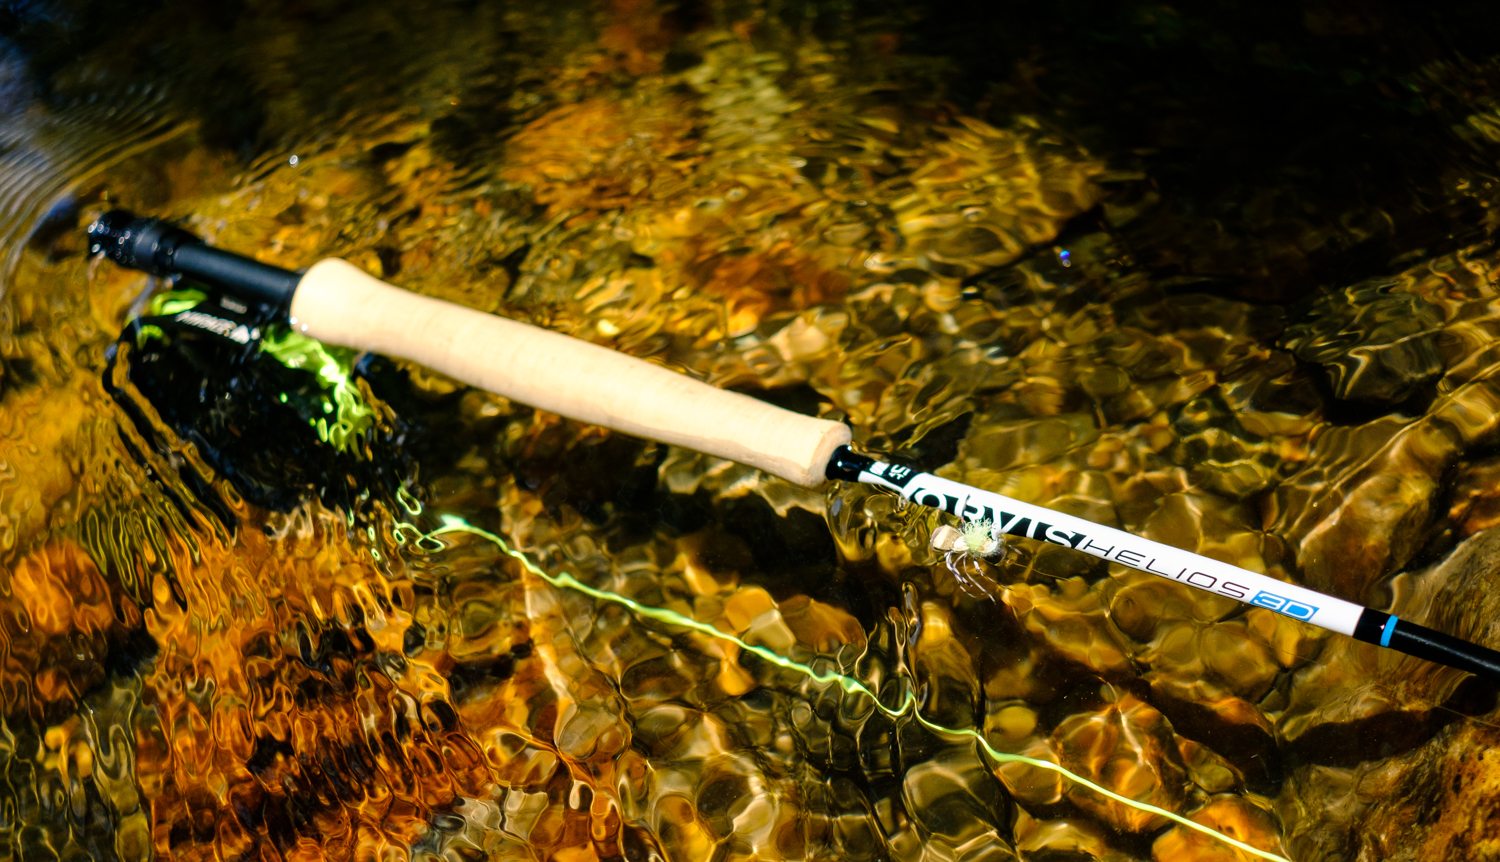 Is The Orvis Helios 3 The Most Accurate Fly Rod Ever Made? - Fly Fishing, Gink and Gasoline, How to Fly Fish, Trout Fishing, Fly Tying